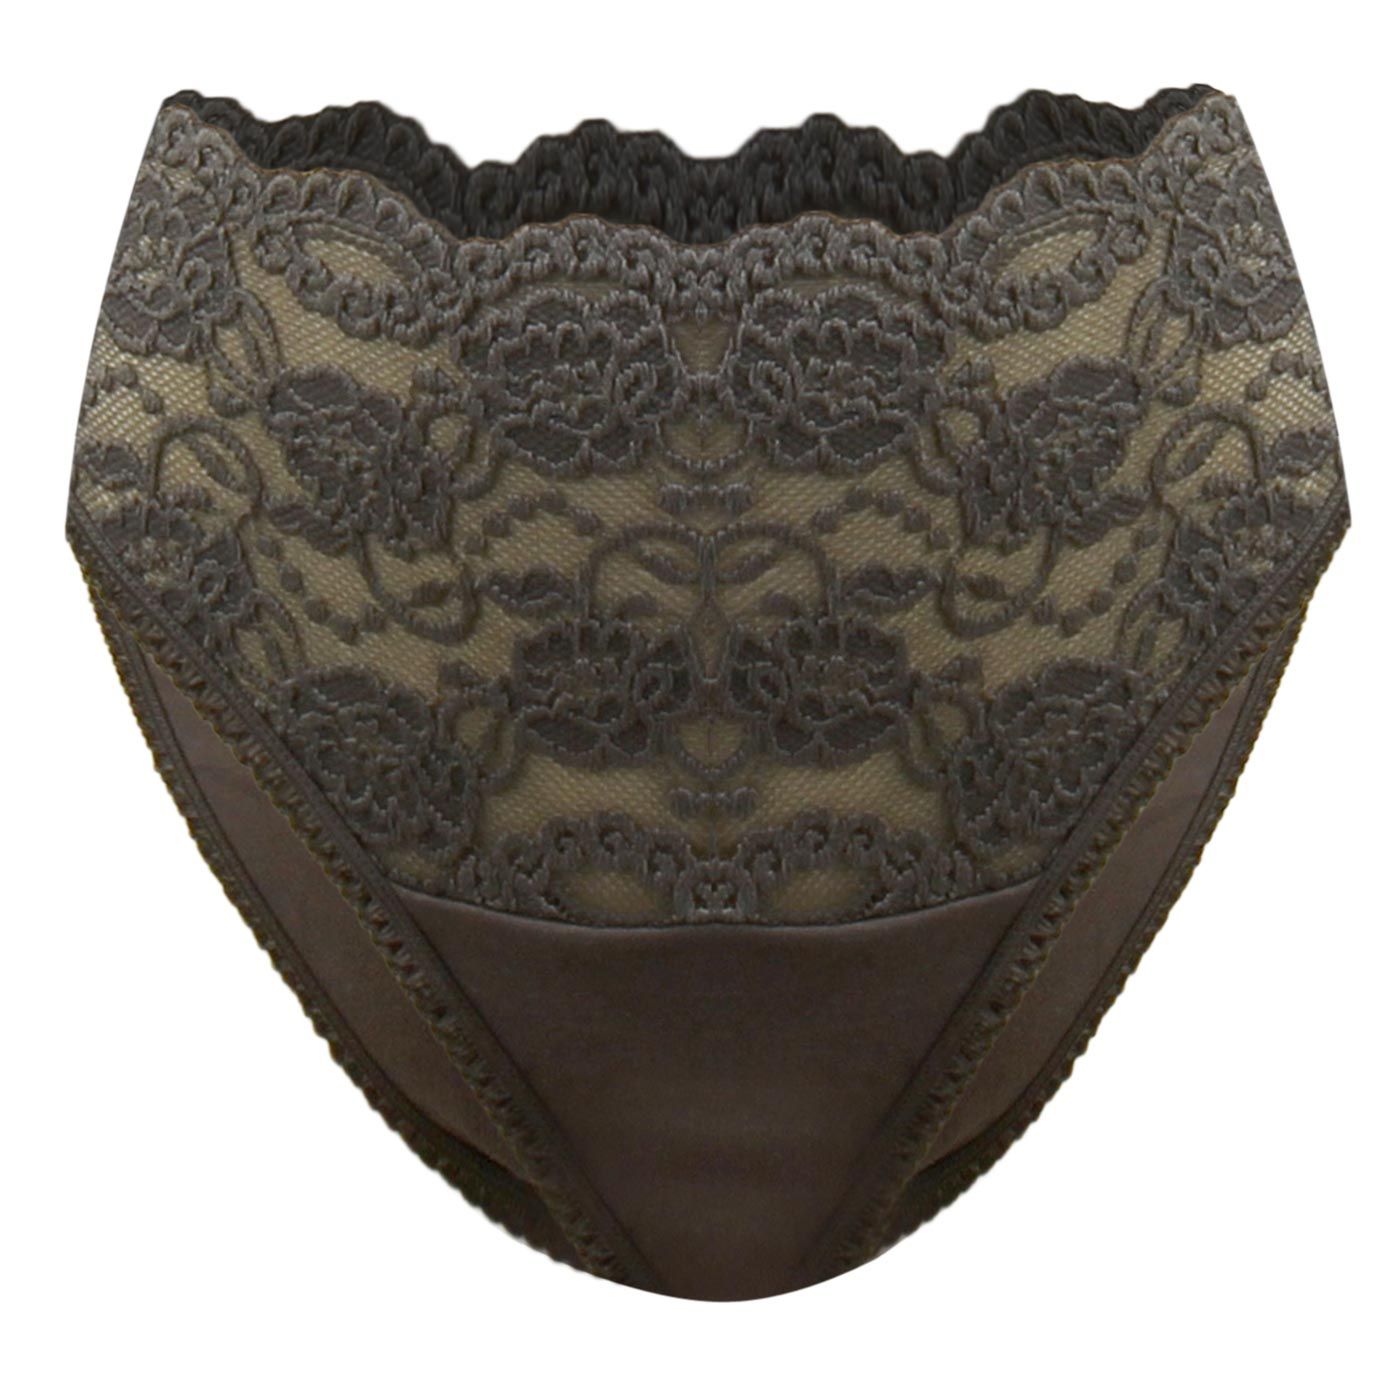 Carriwell Lace Stretch Panties-S-Olive - 1